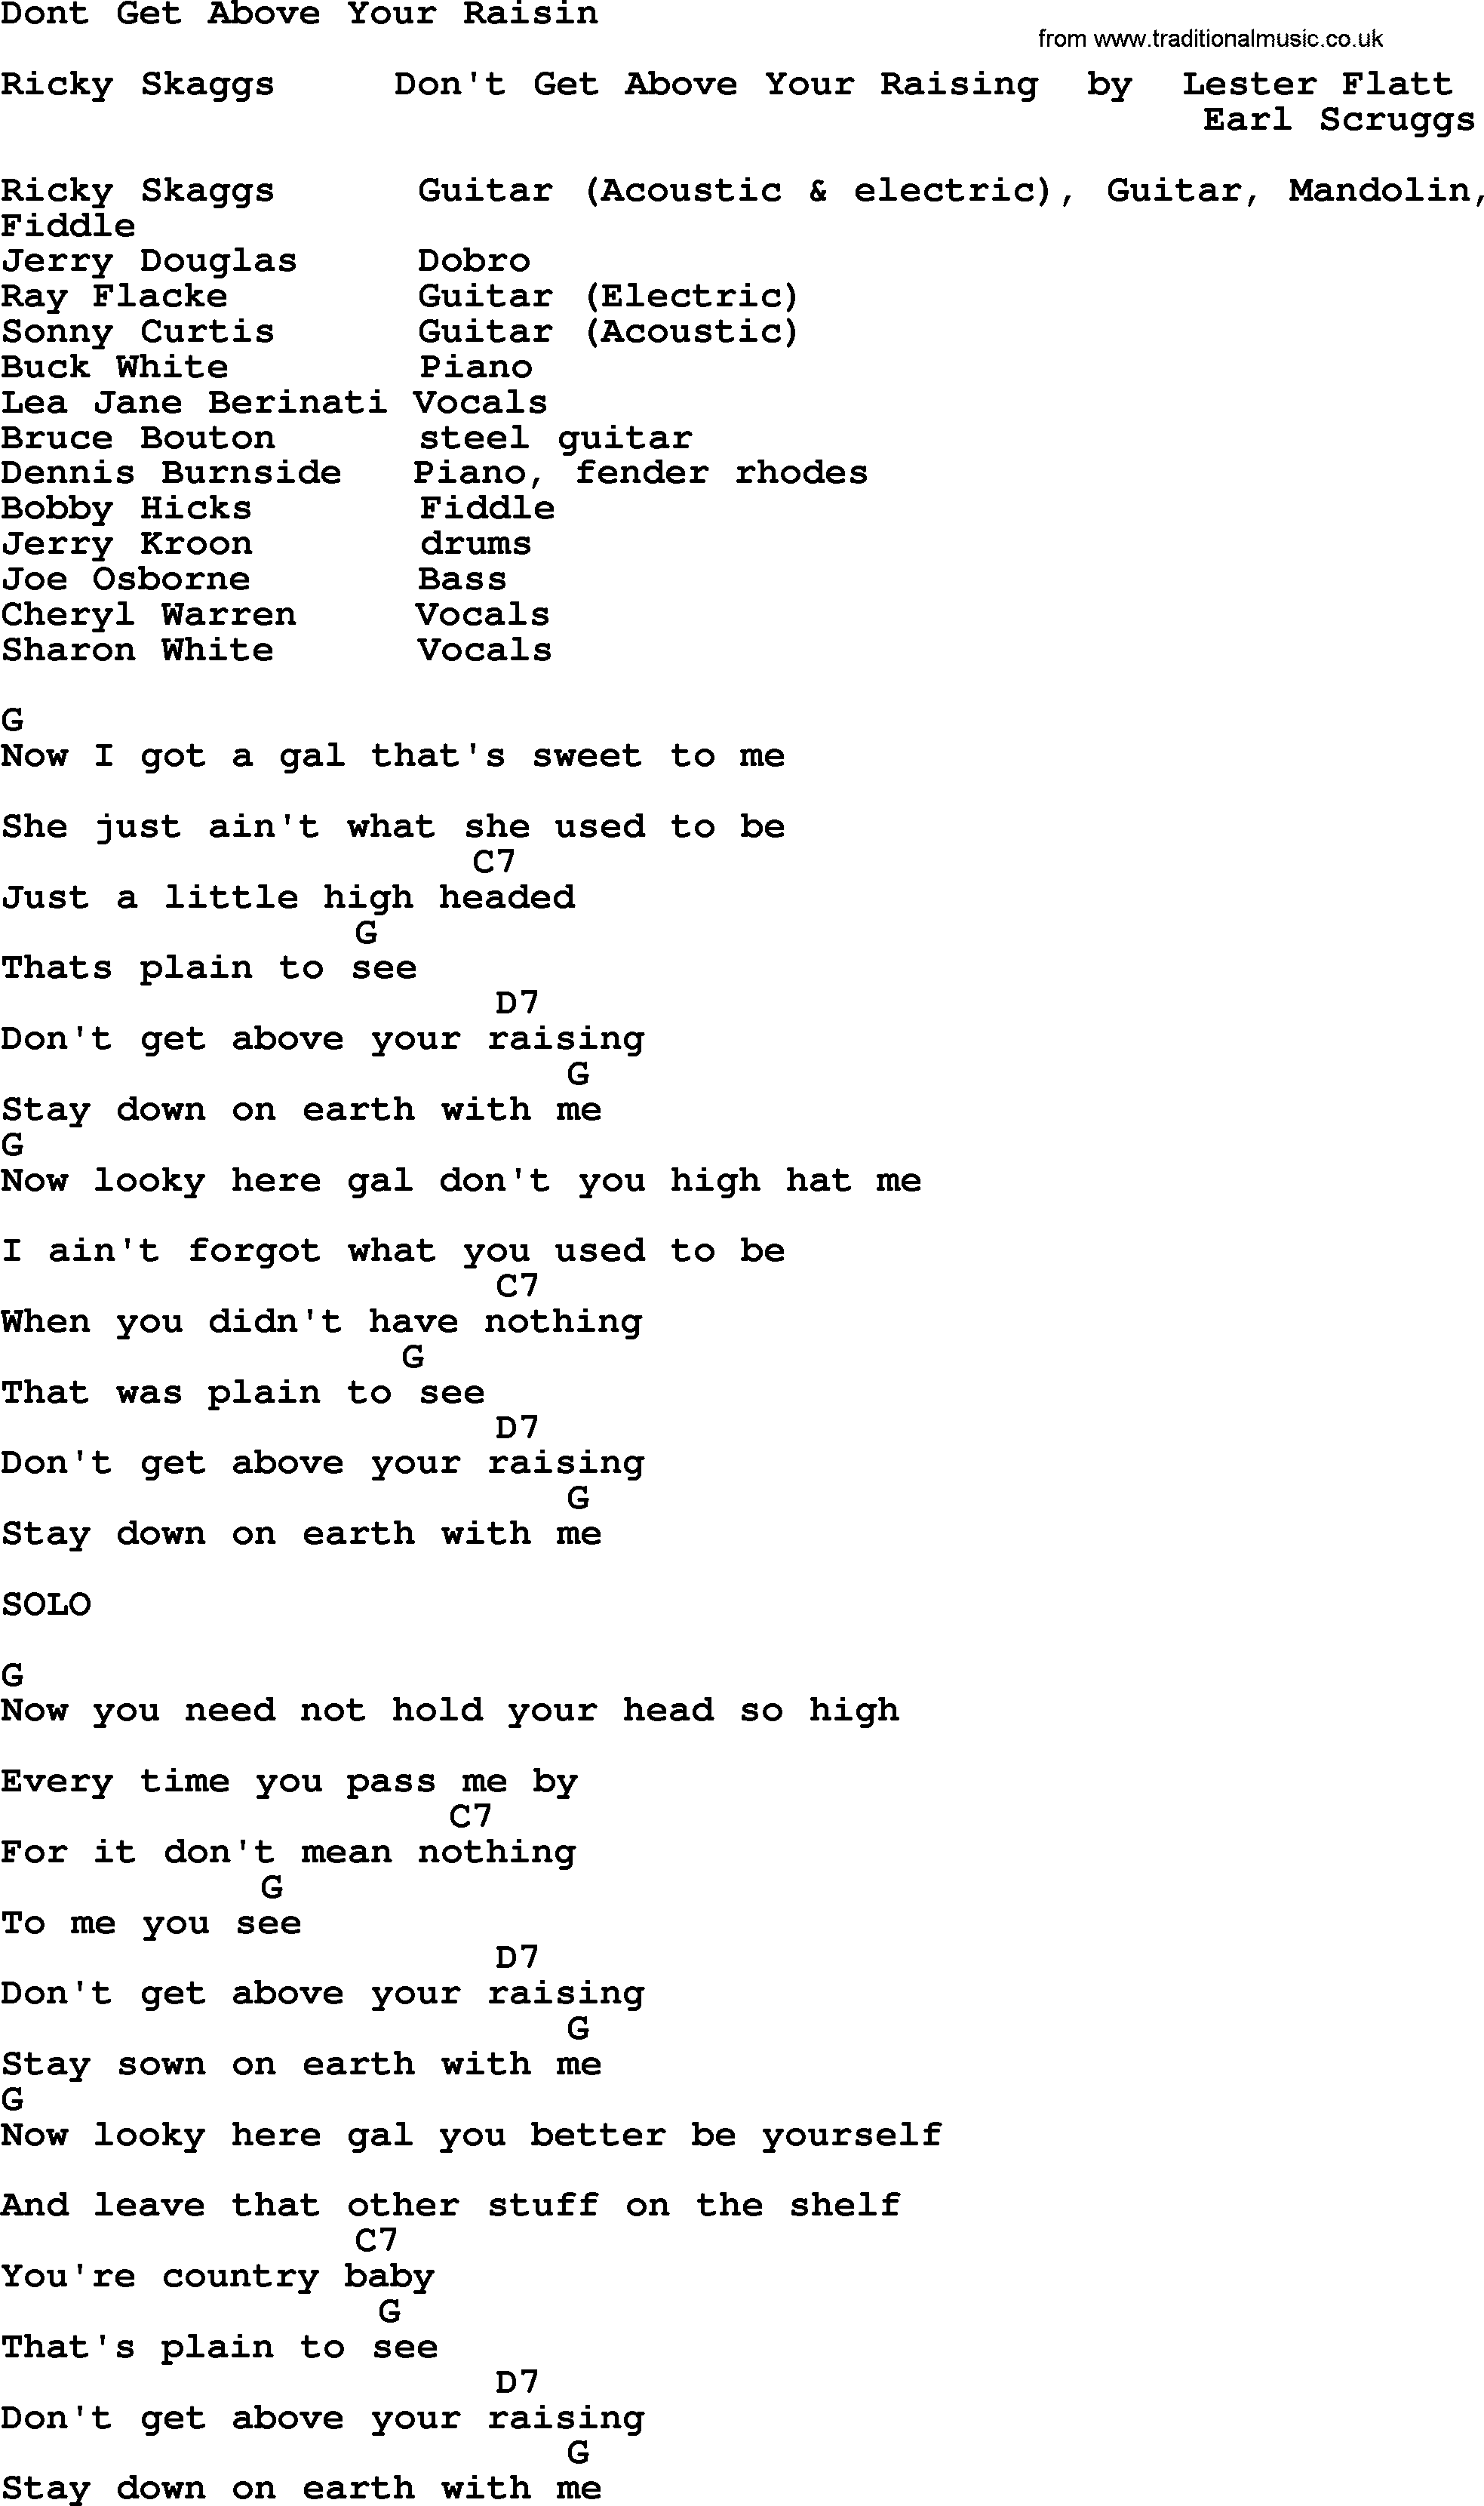 Bluegrass song: Dont Get Above Your Raisin, lyrics and chords